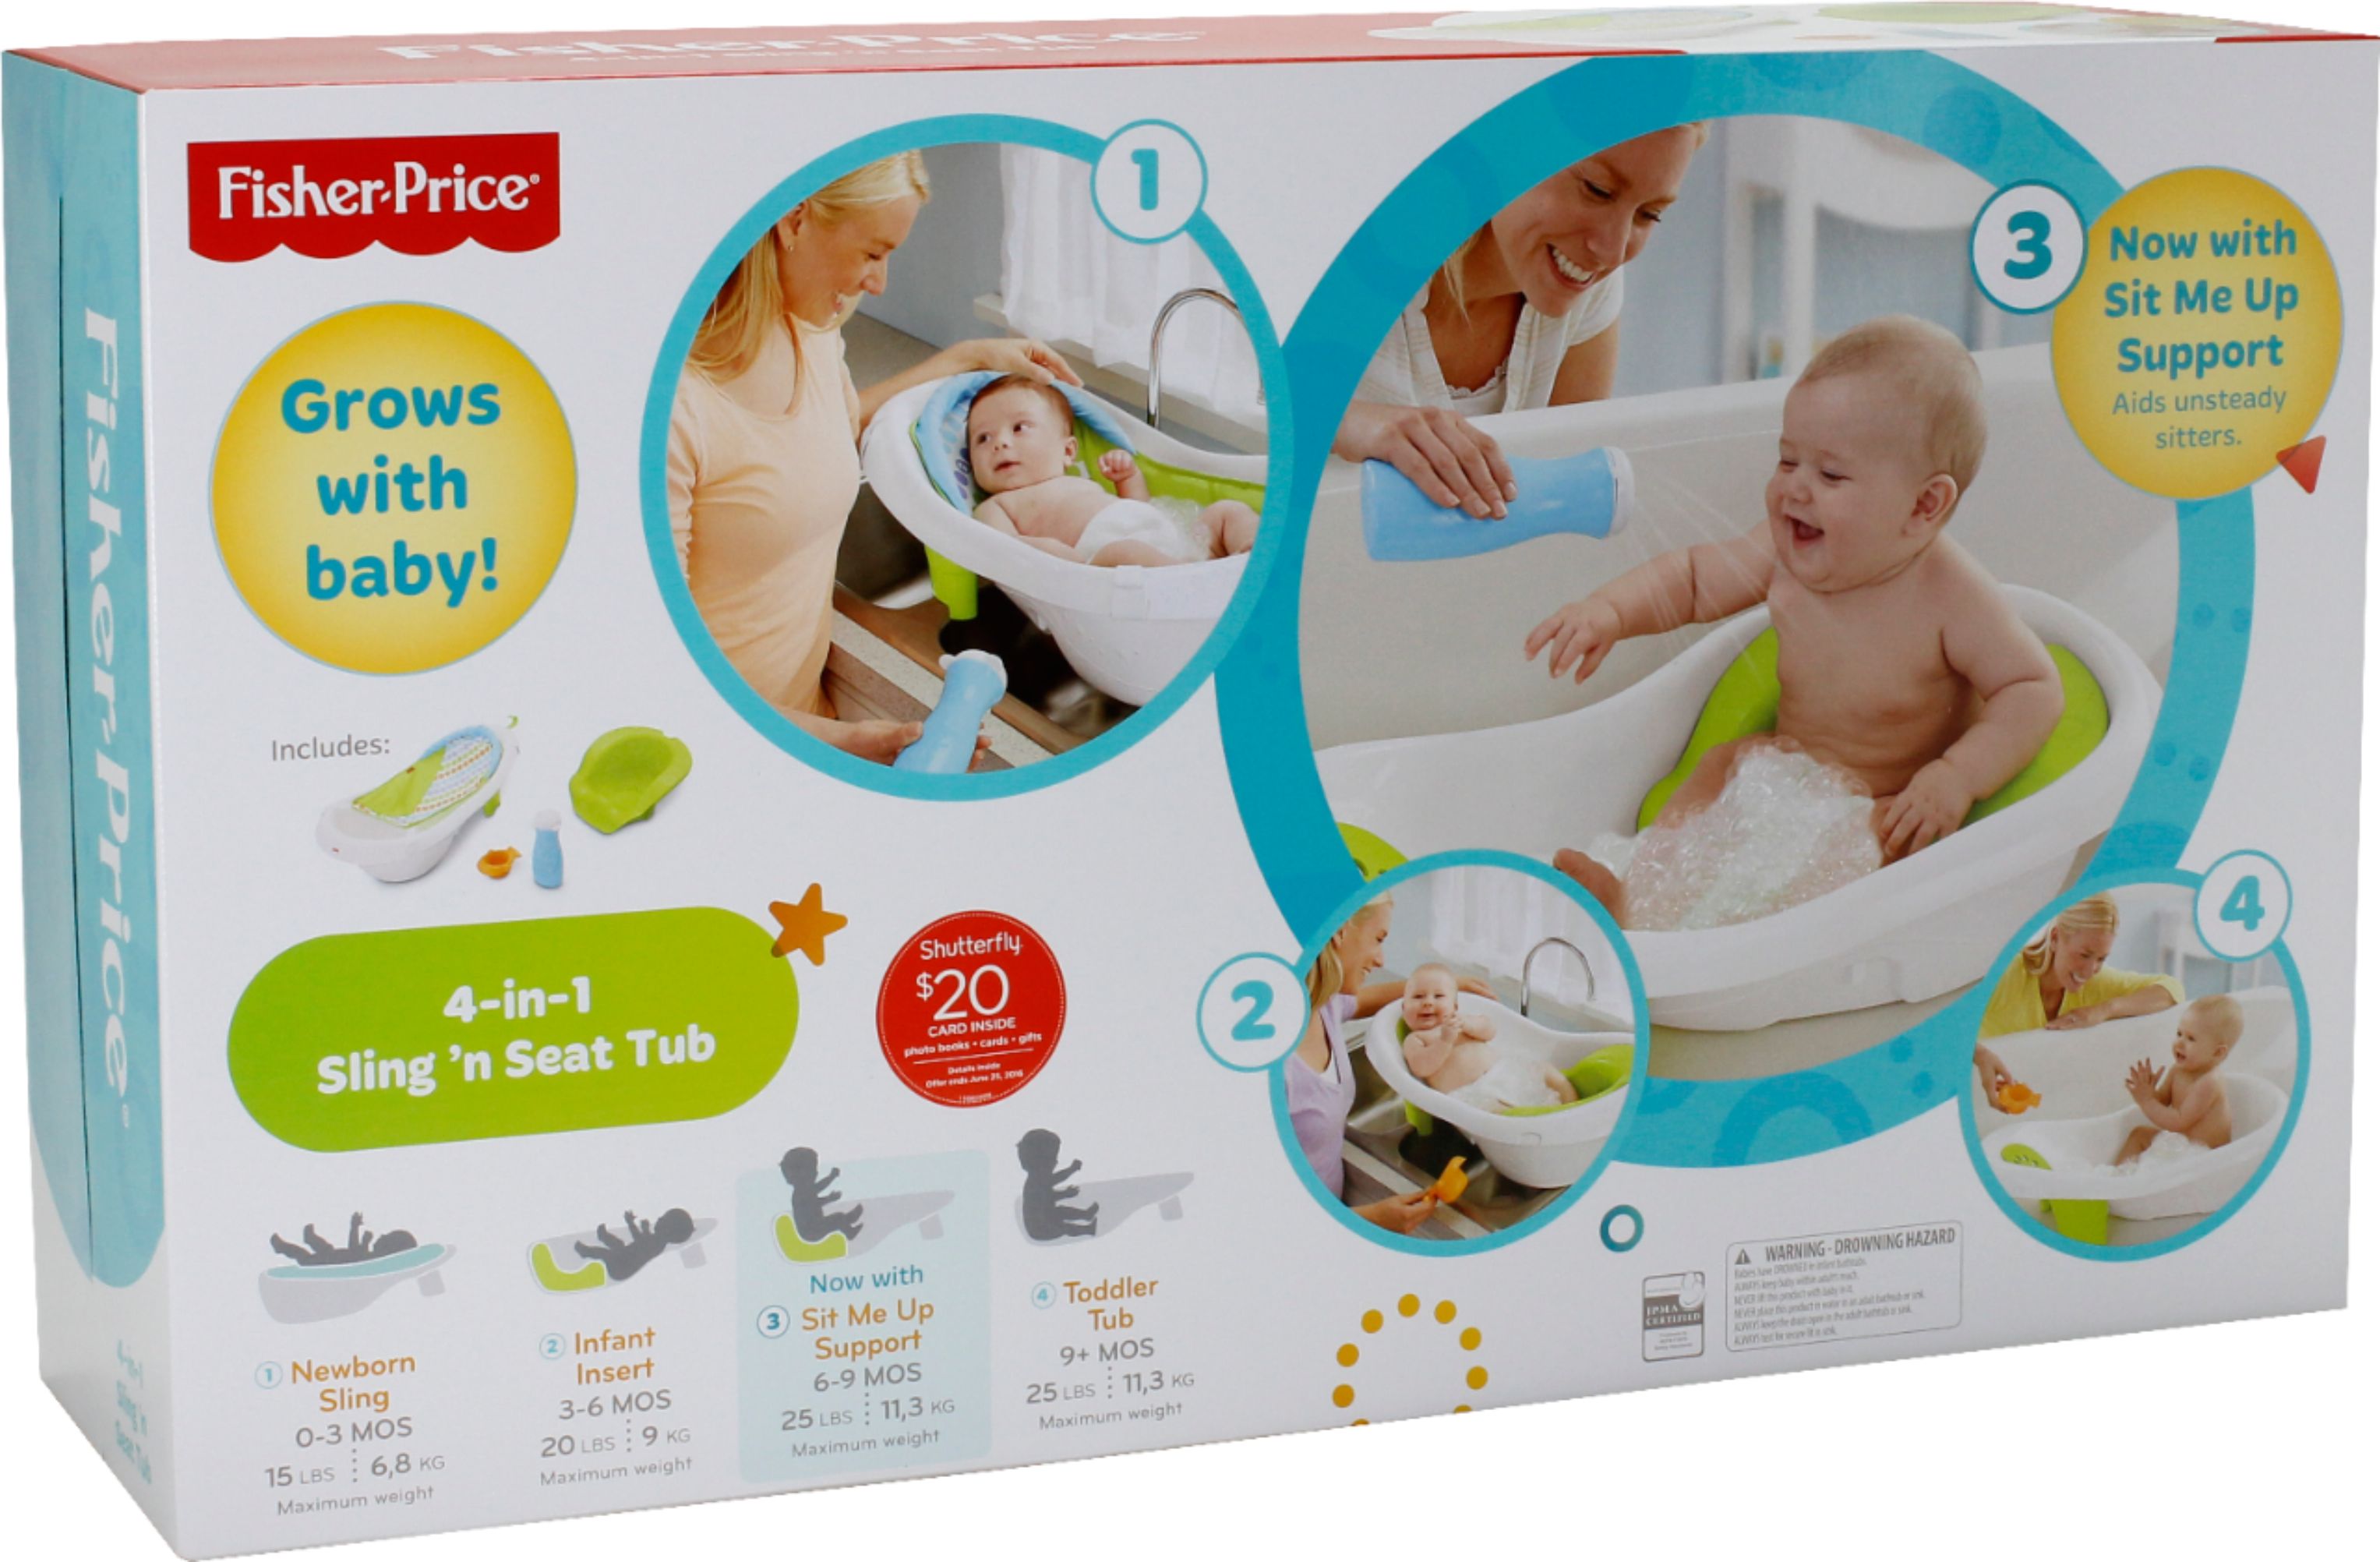 Fisher-Price 4-in-1 Sling 'n Seat Tub White/Green BDY86 - Best Buy